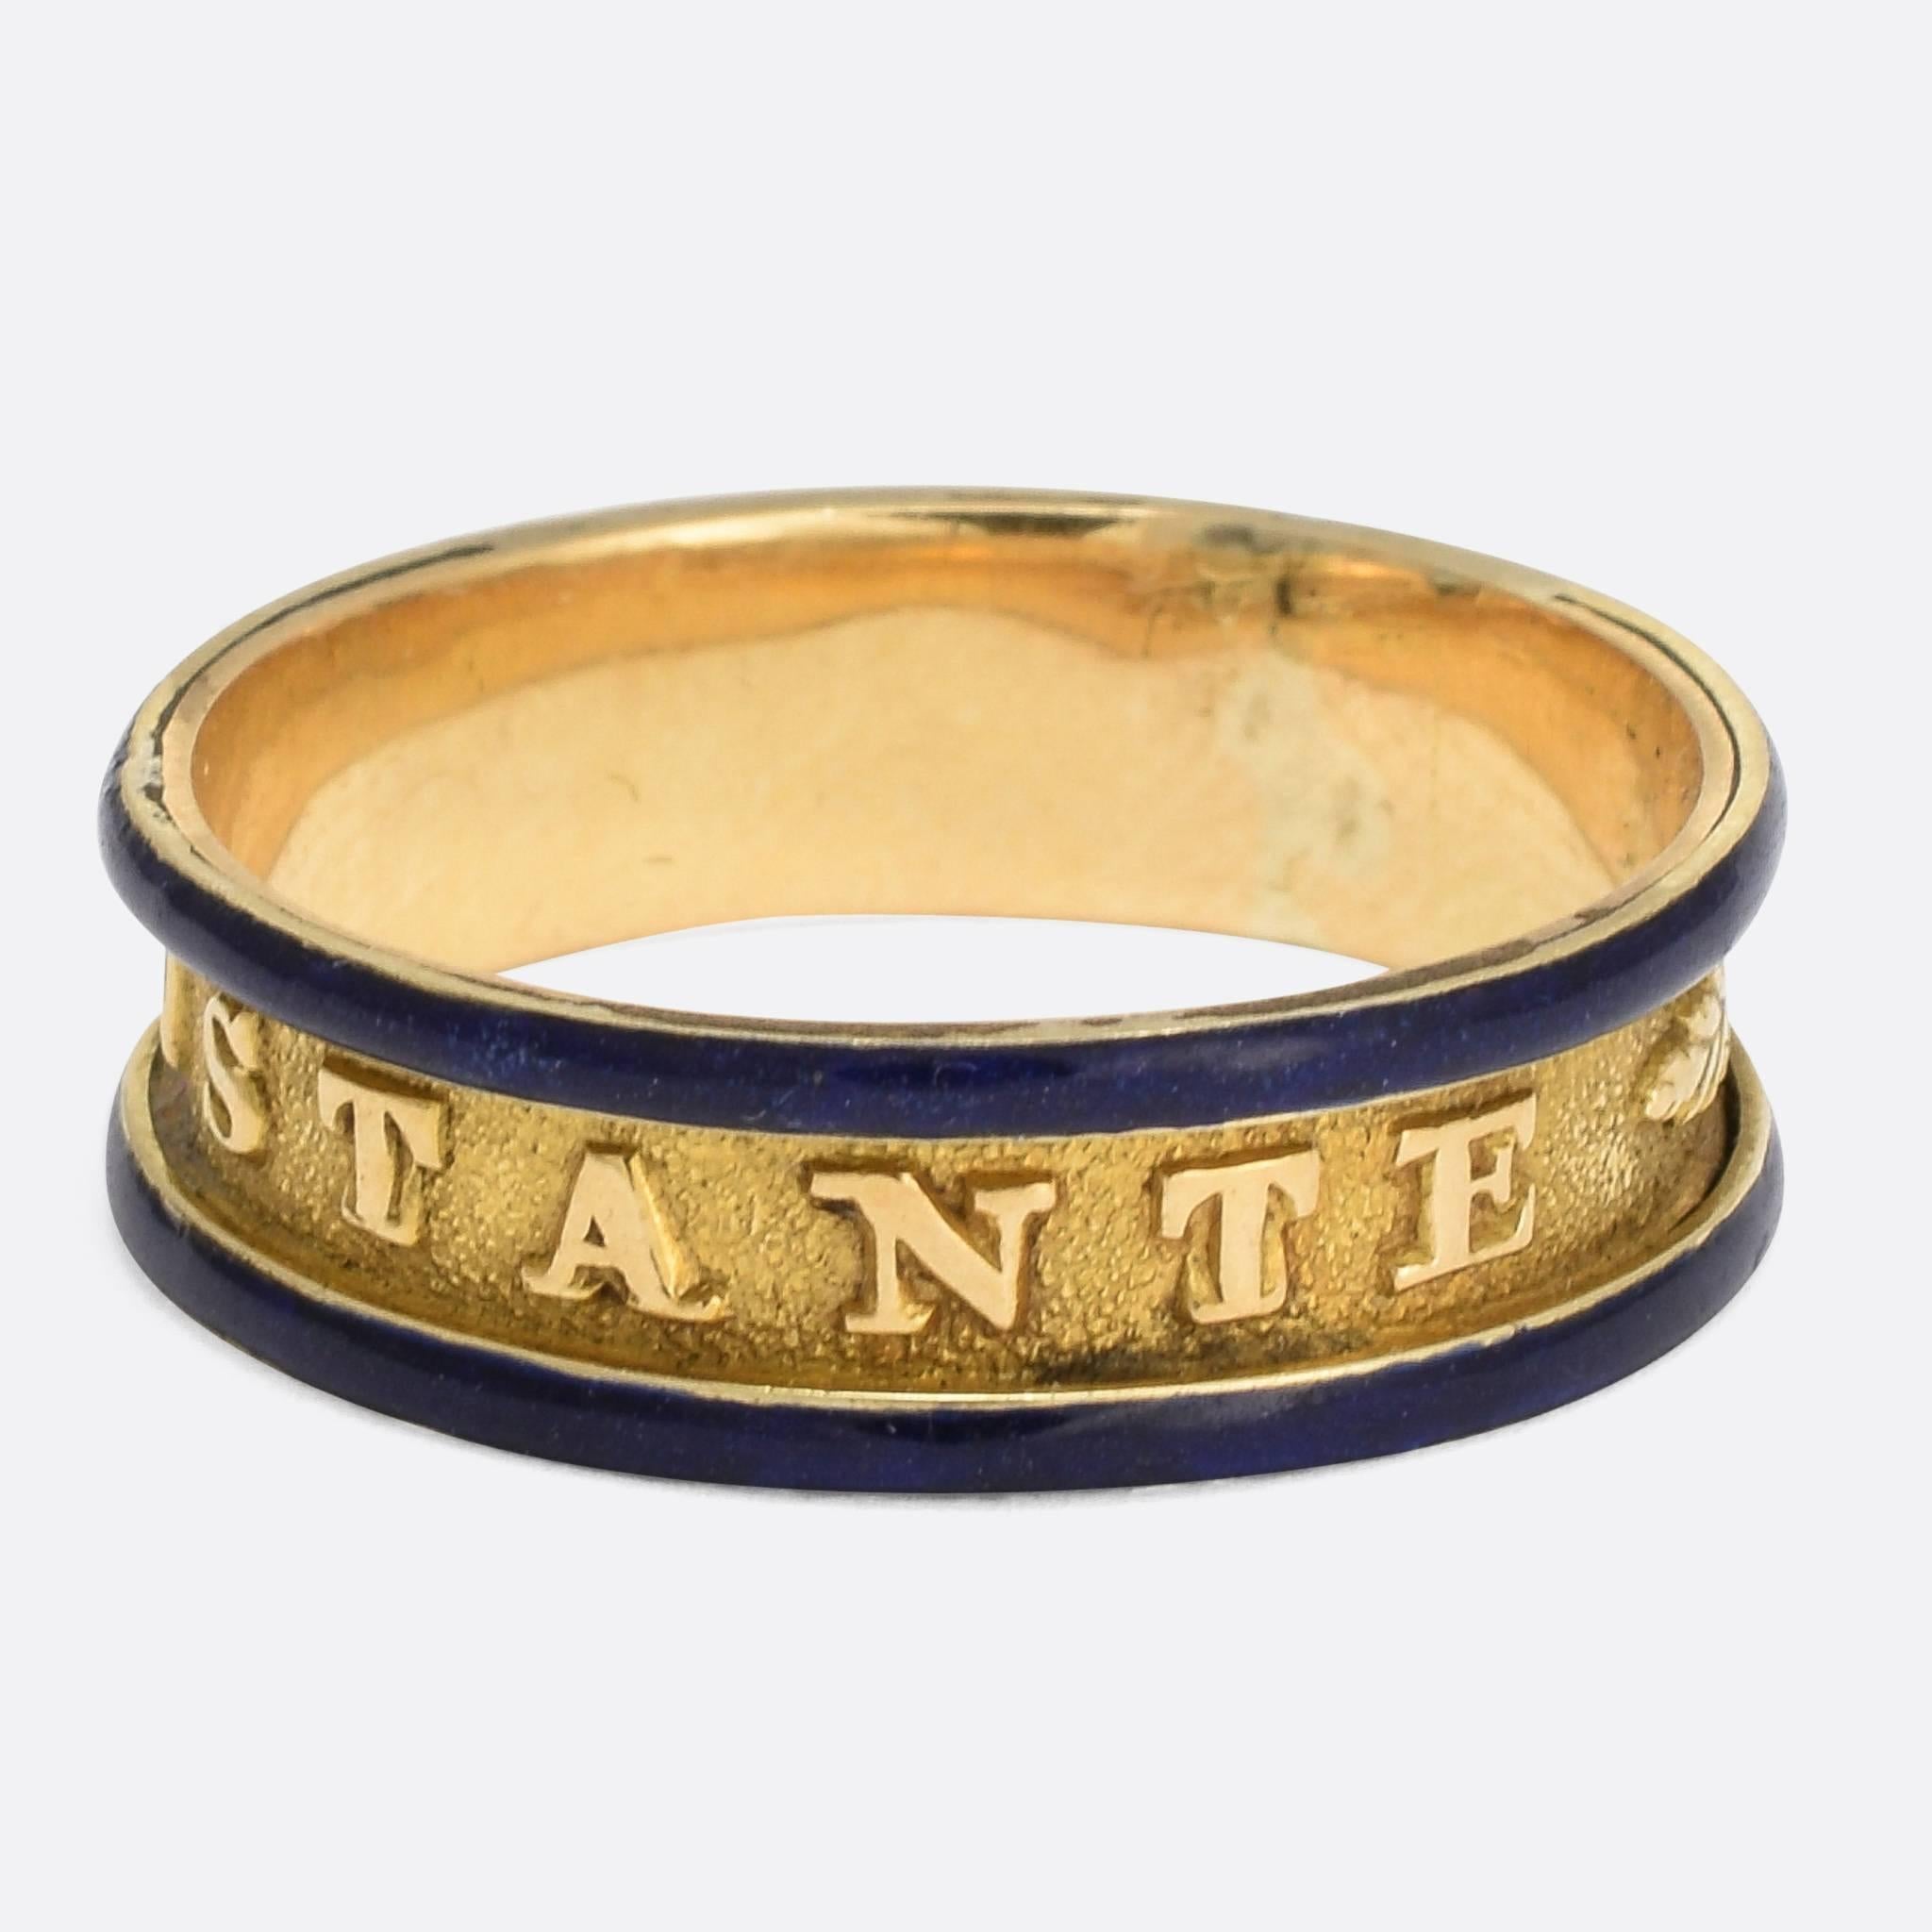 This splendid Georgian ring bears the Latin word CONSTANTE, meaning 